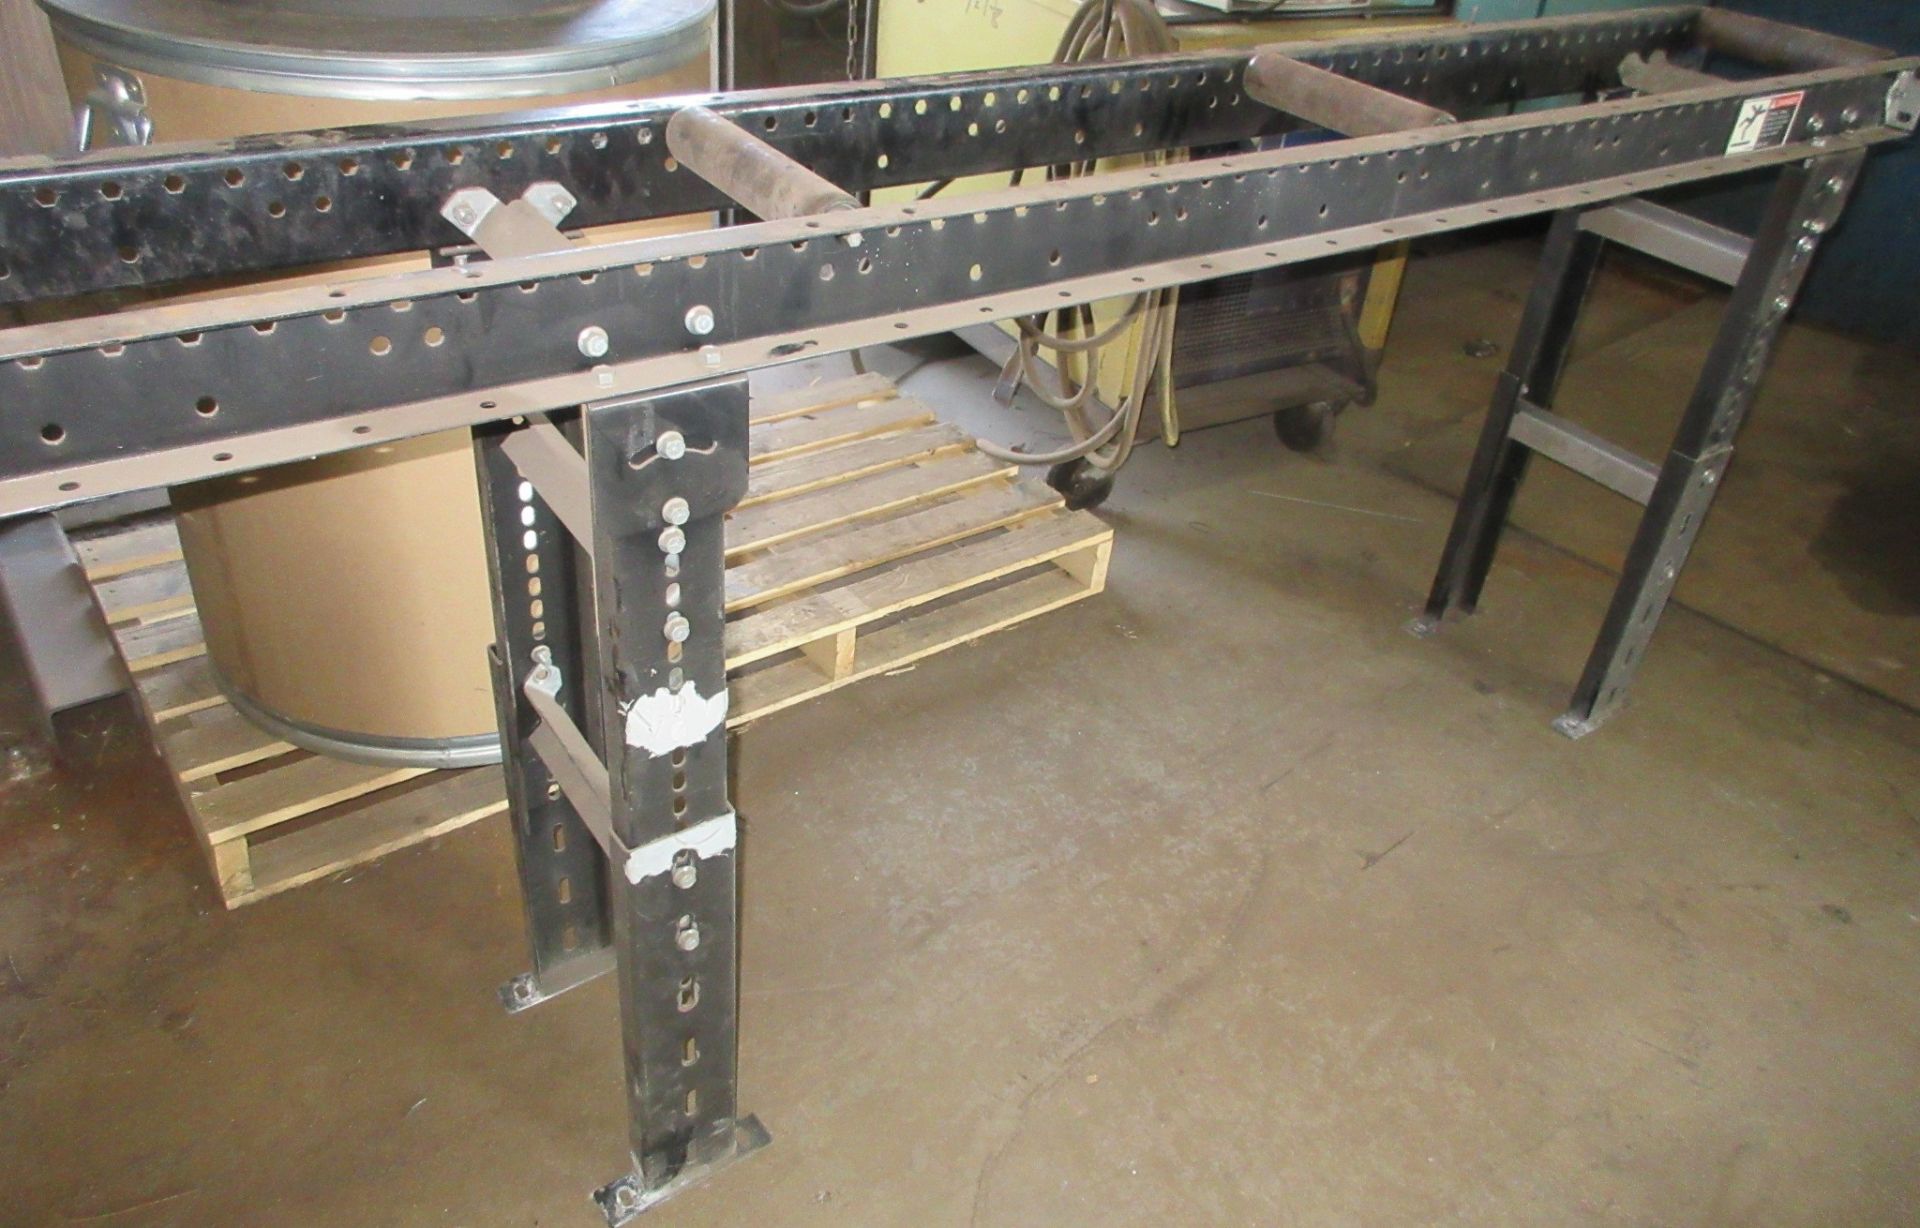 SCOTCHMAN CPO-350 COLD CUT SAW, 350LT/PA/11 W/ INFEED AND OUTFEED CONVEYORS - Image 8 of 8